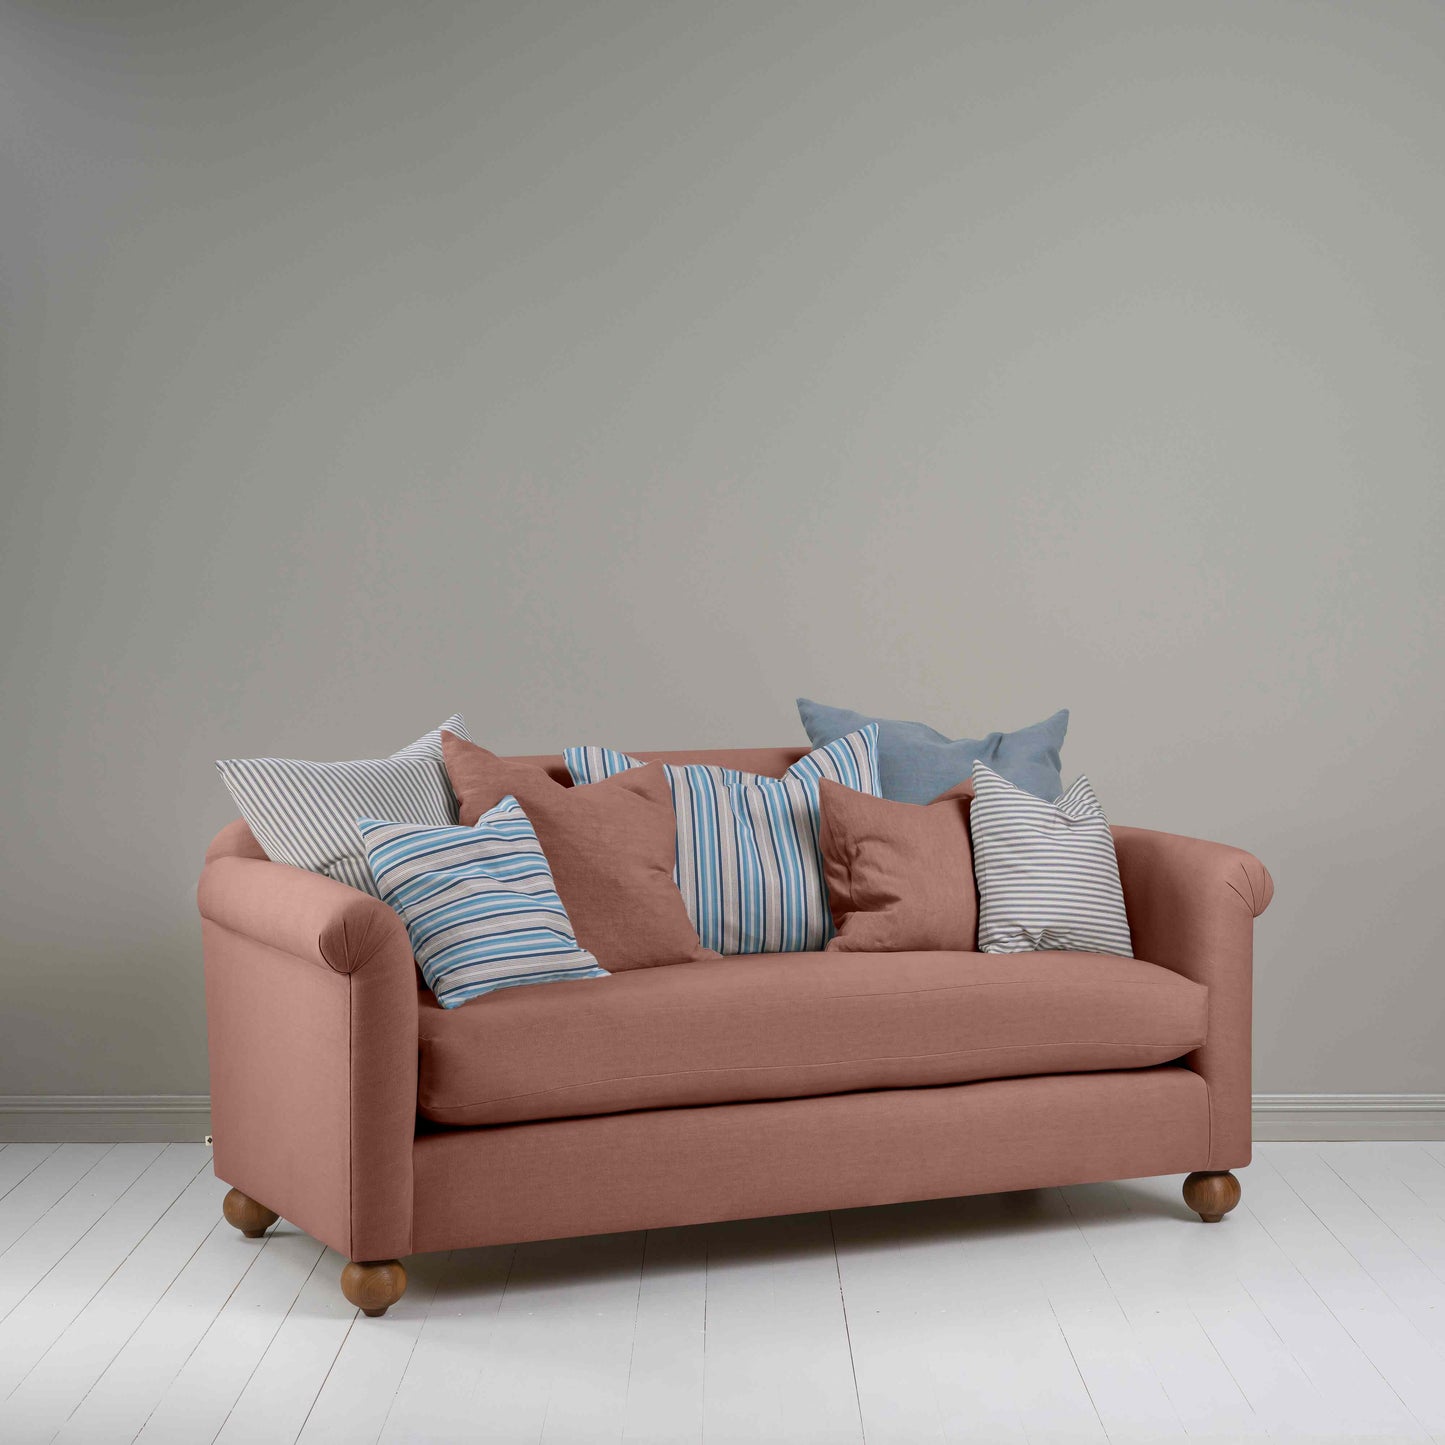 Dolittle 3 Seater Sofa in Laidback Linen Sweet Briar